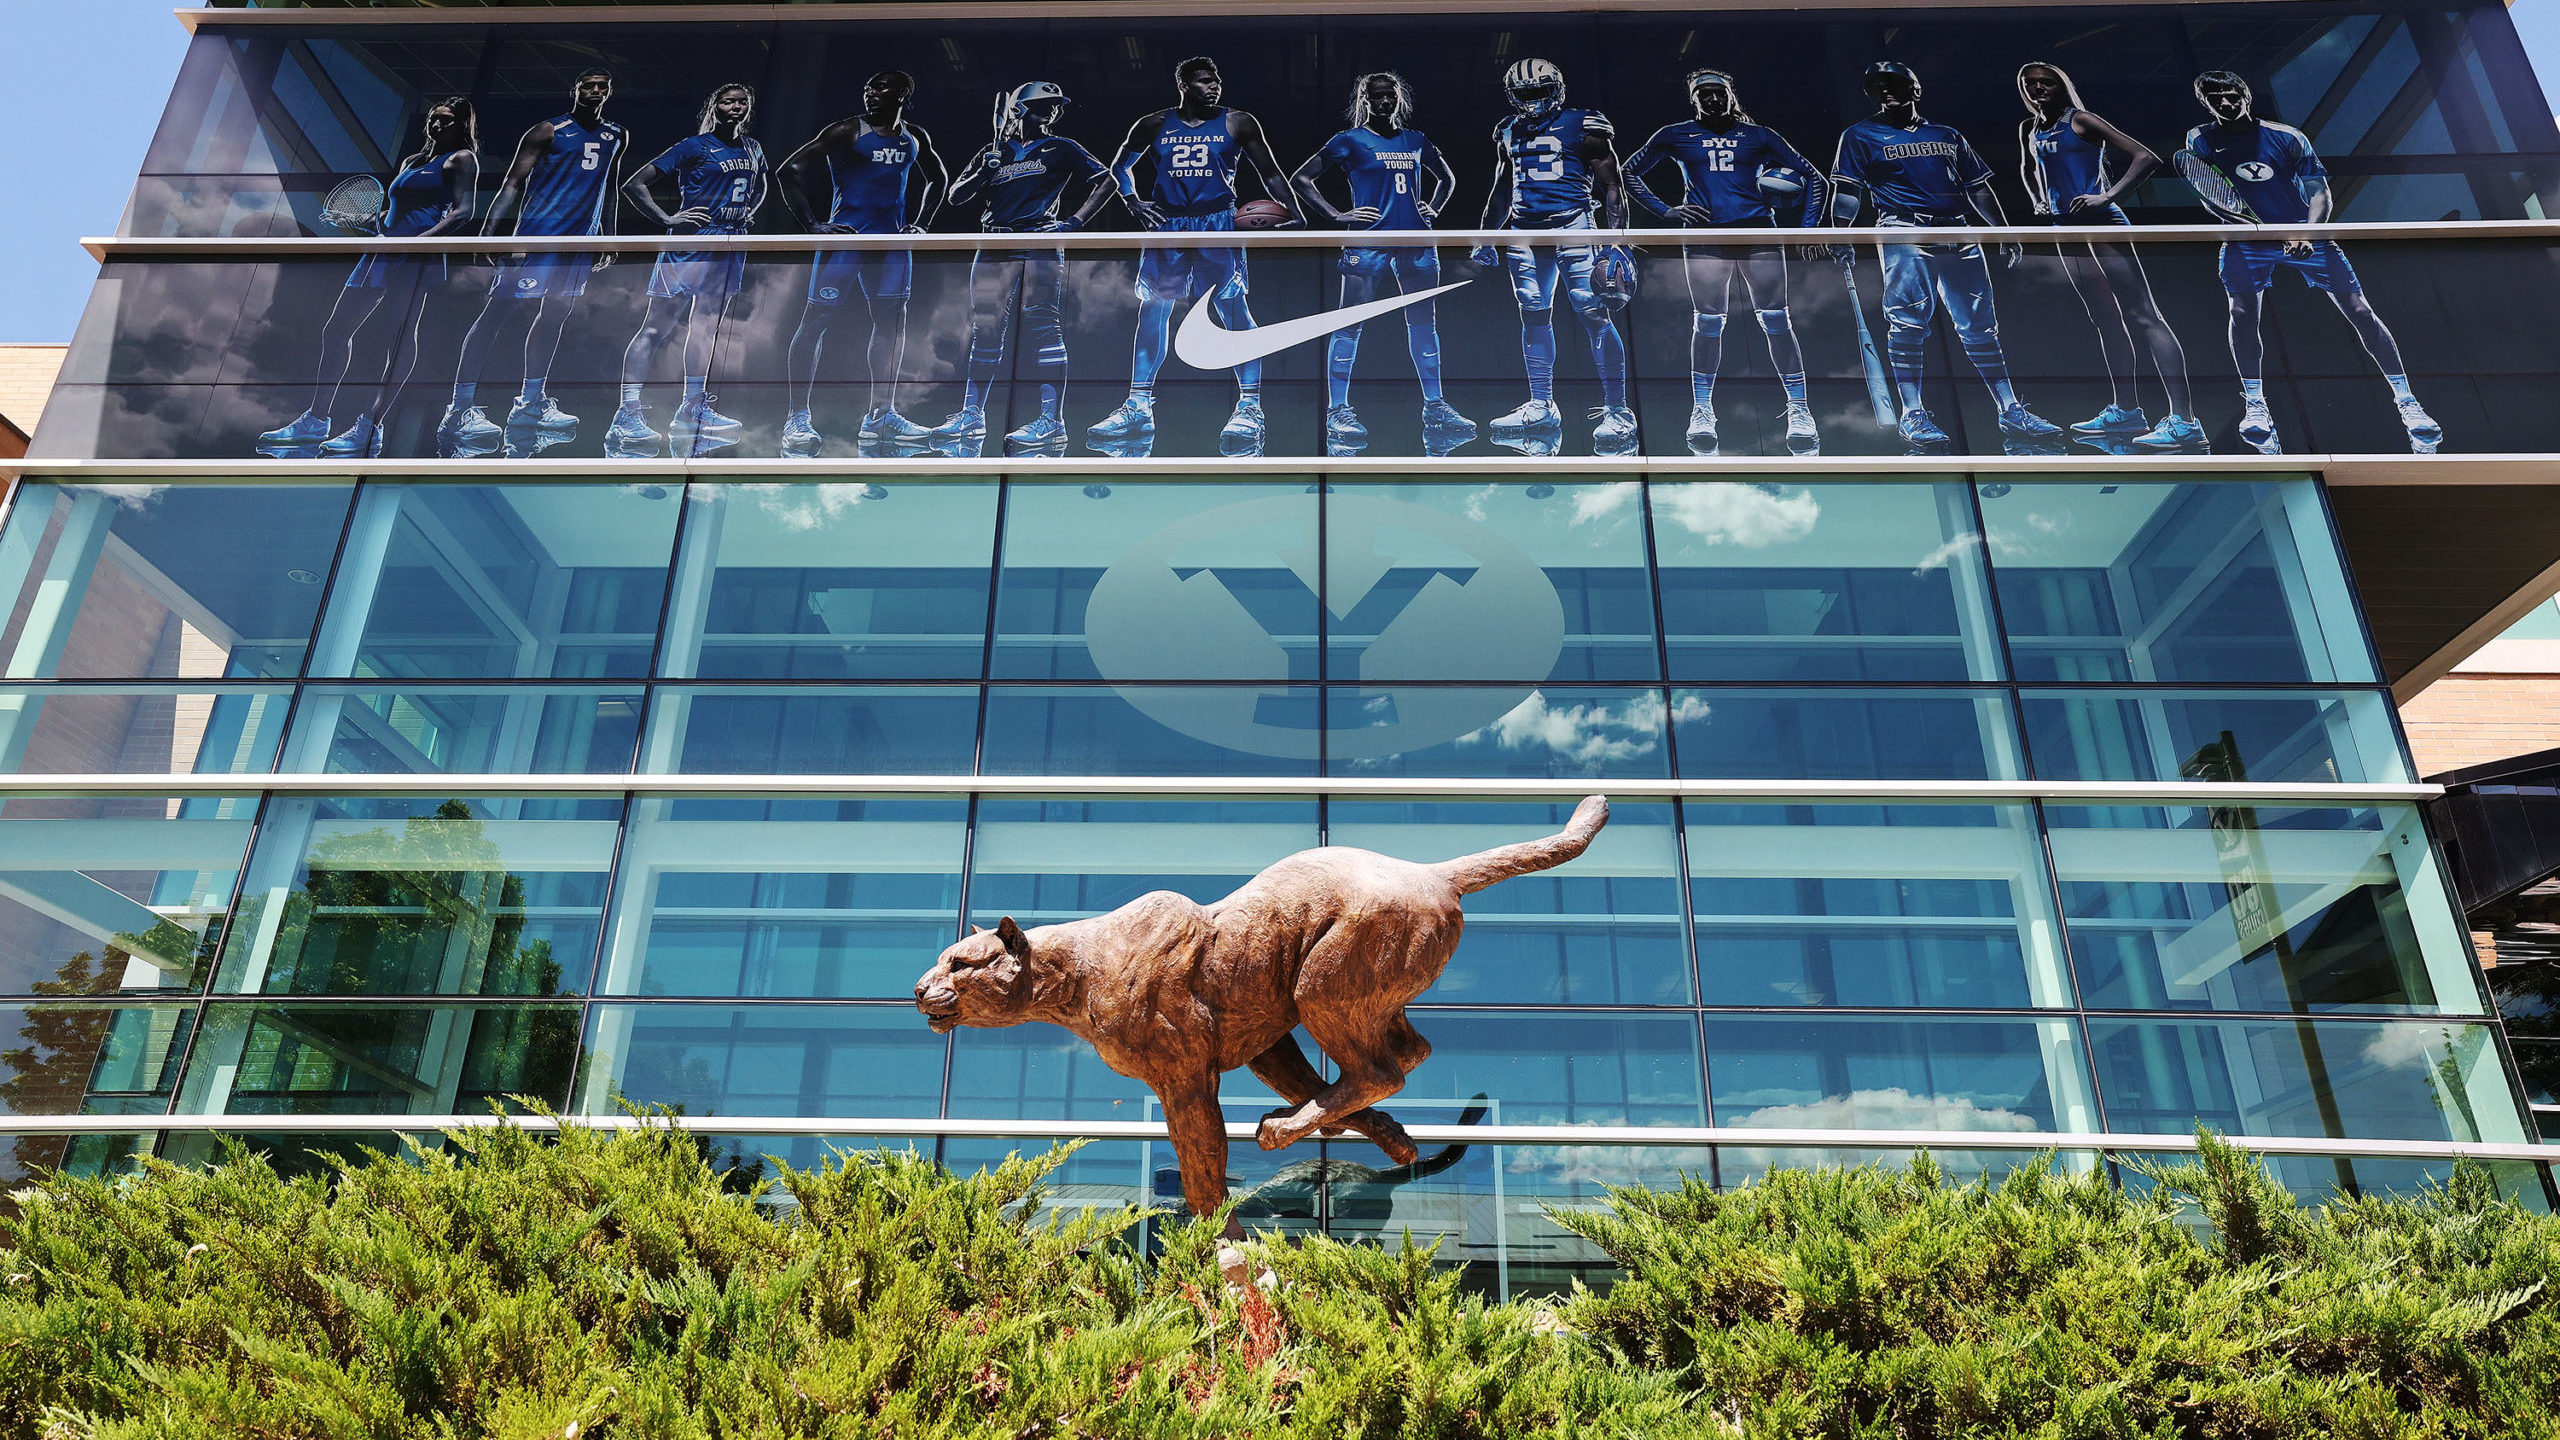 BYU Student athletic building. A racist slur was investigated by BYU...